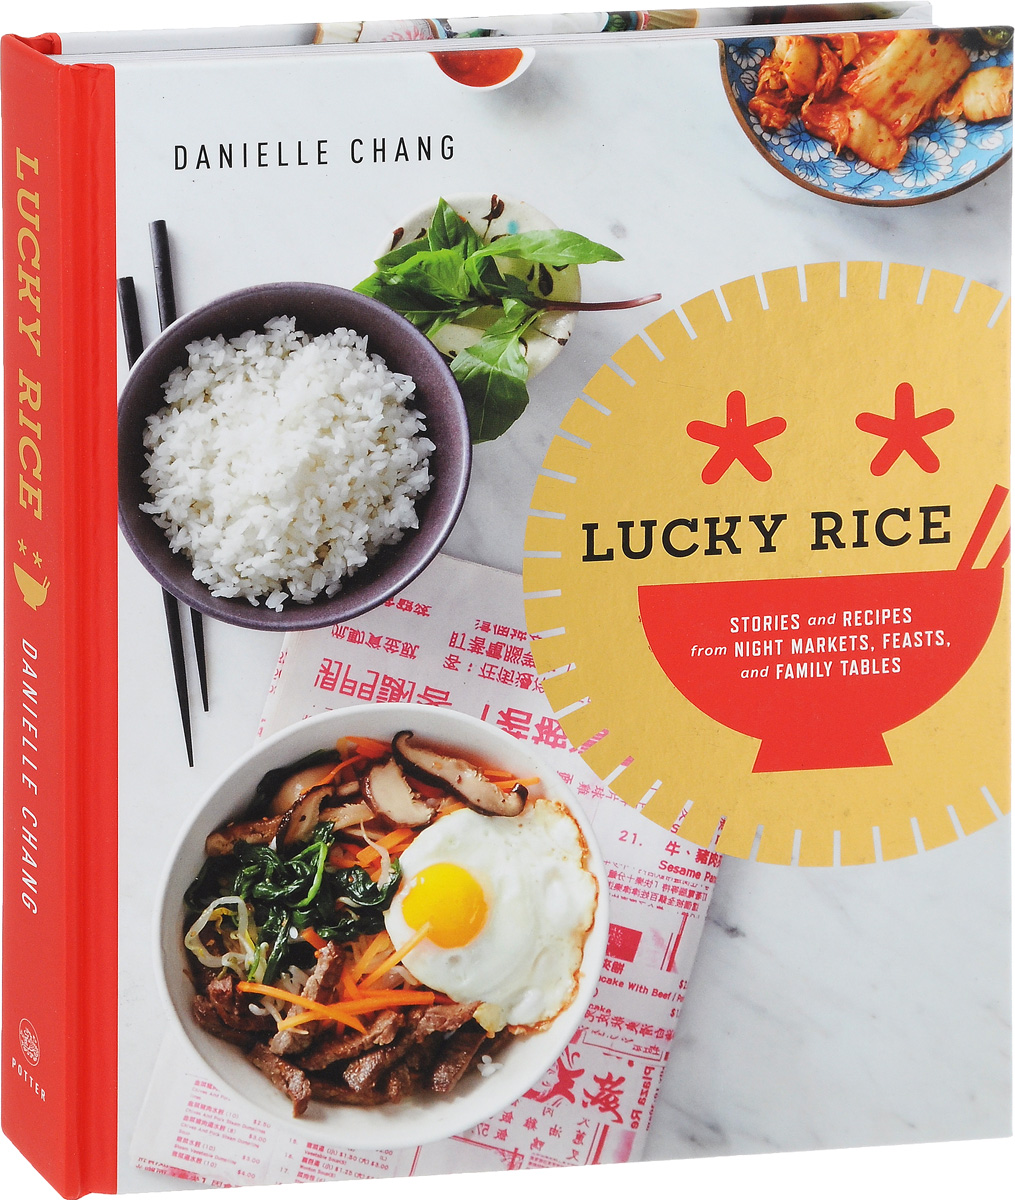 Lucky Rice: Stories And Recipes from Night Markets, Feasts, And Family Tables